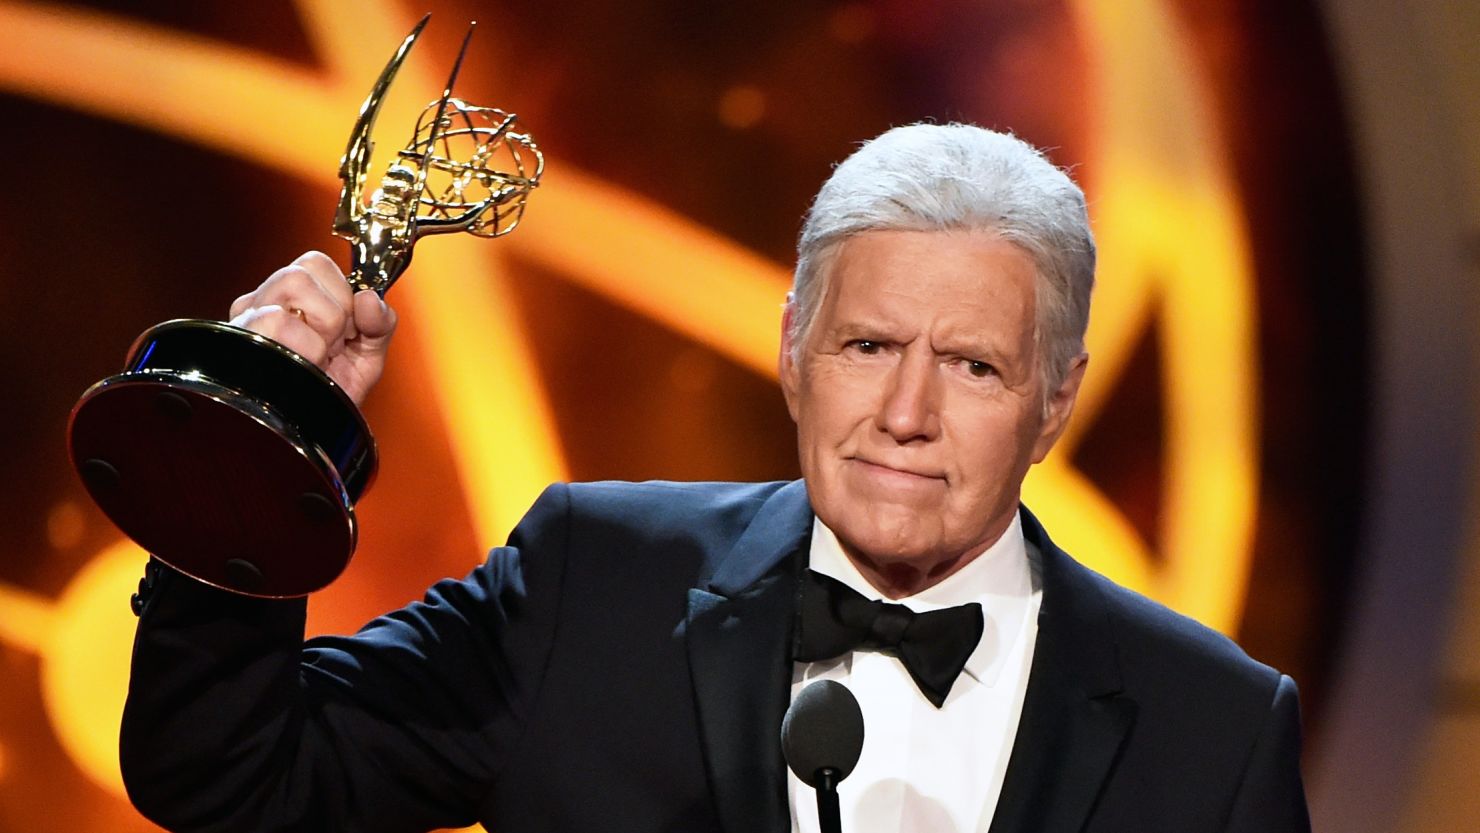 Alex Trebek accepts the Daytime Emmy Award for Outstanding Game Show Host onstage during the 46th annual Daytime Emmy Awards at Pasadena Civic Center on Sunday in Pasadena, California. 